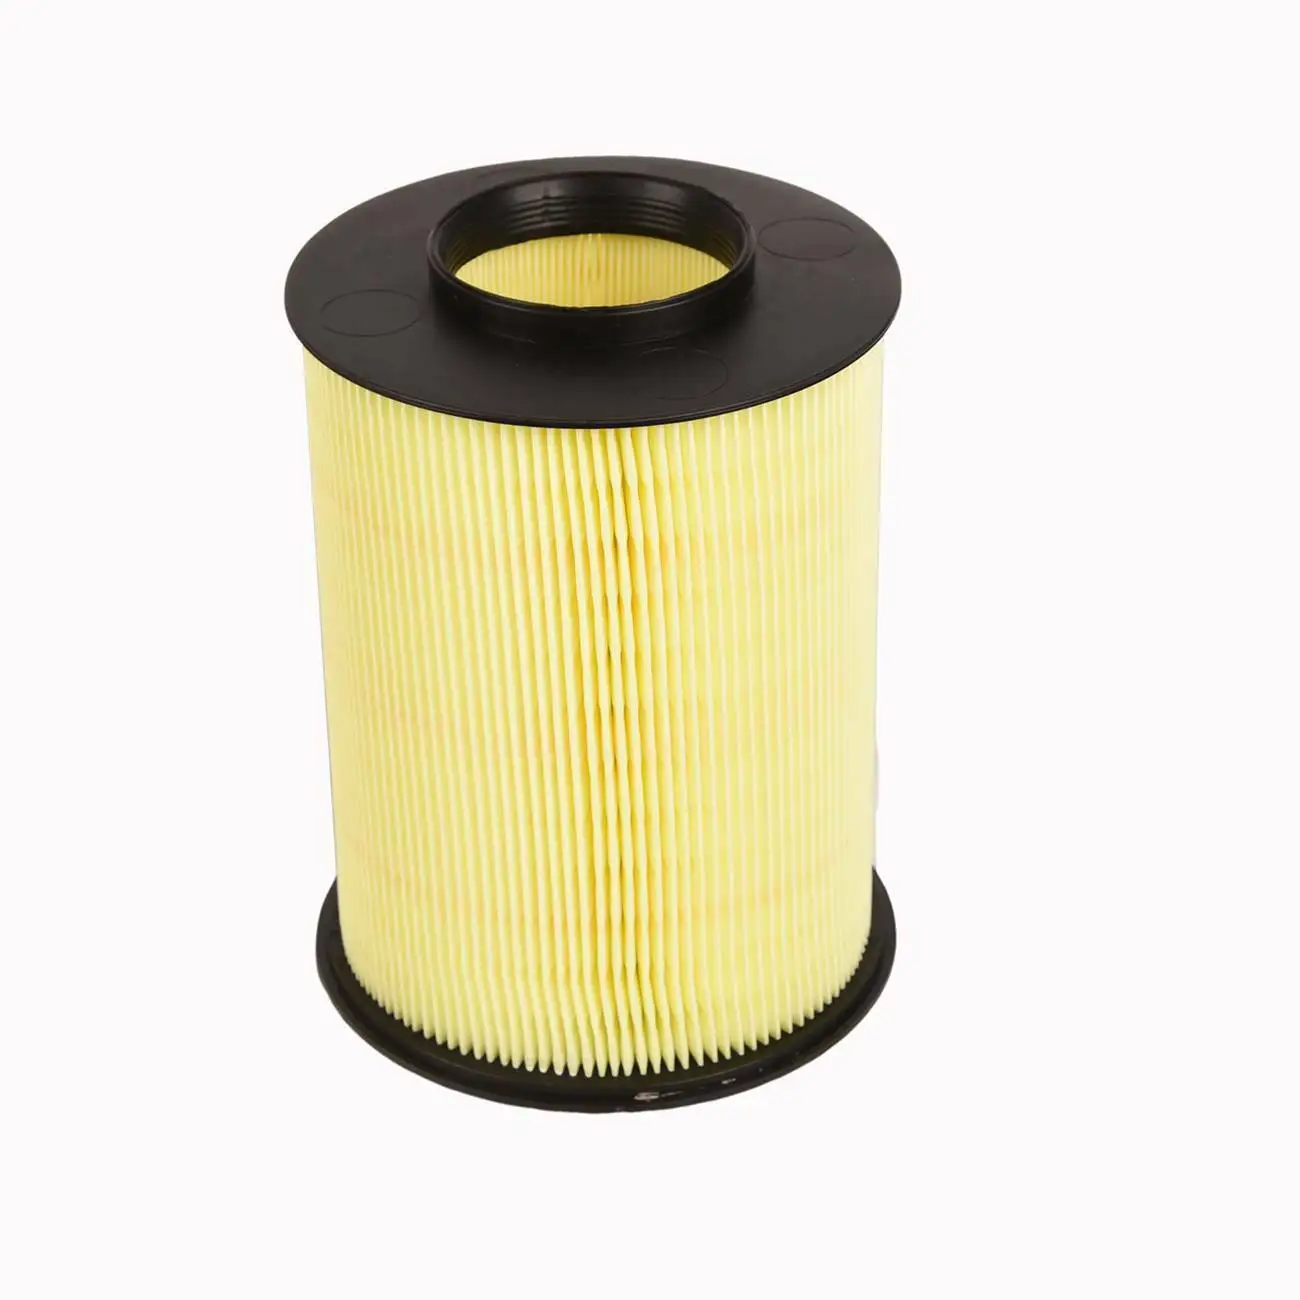 

7M51-9601-AC Air Filter For Ford Focus MK2 MK3 II III Kuga Escape C-MAX Transit Tourneo Connect For Volvo S40 V50 C70 C30 V40